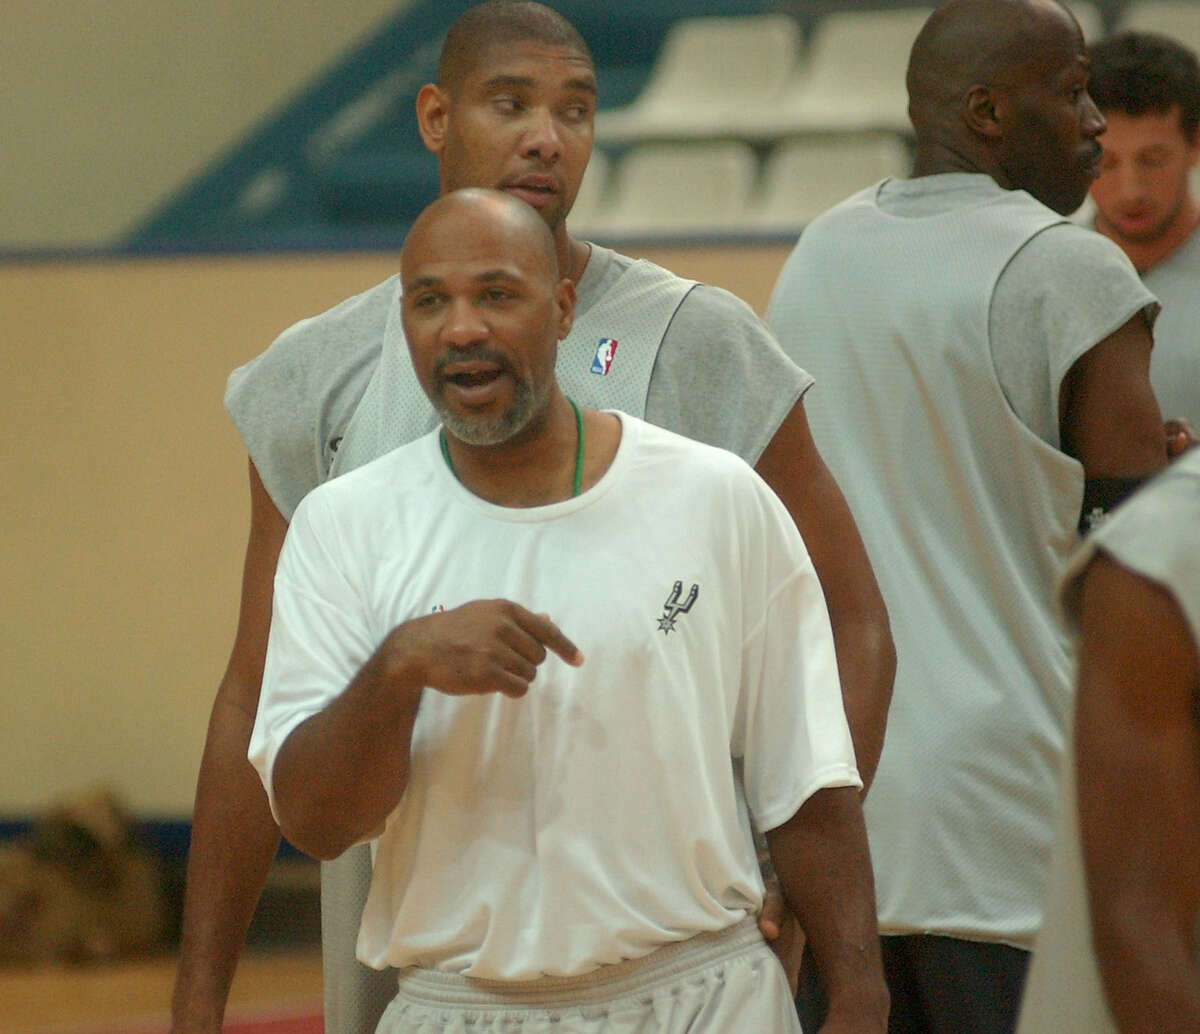 New Spurs assistant coach Mario Elie offers some advice during the San Antonio Spurs practice in Paris on Oct. 7, 2003.